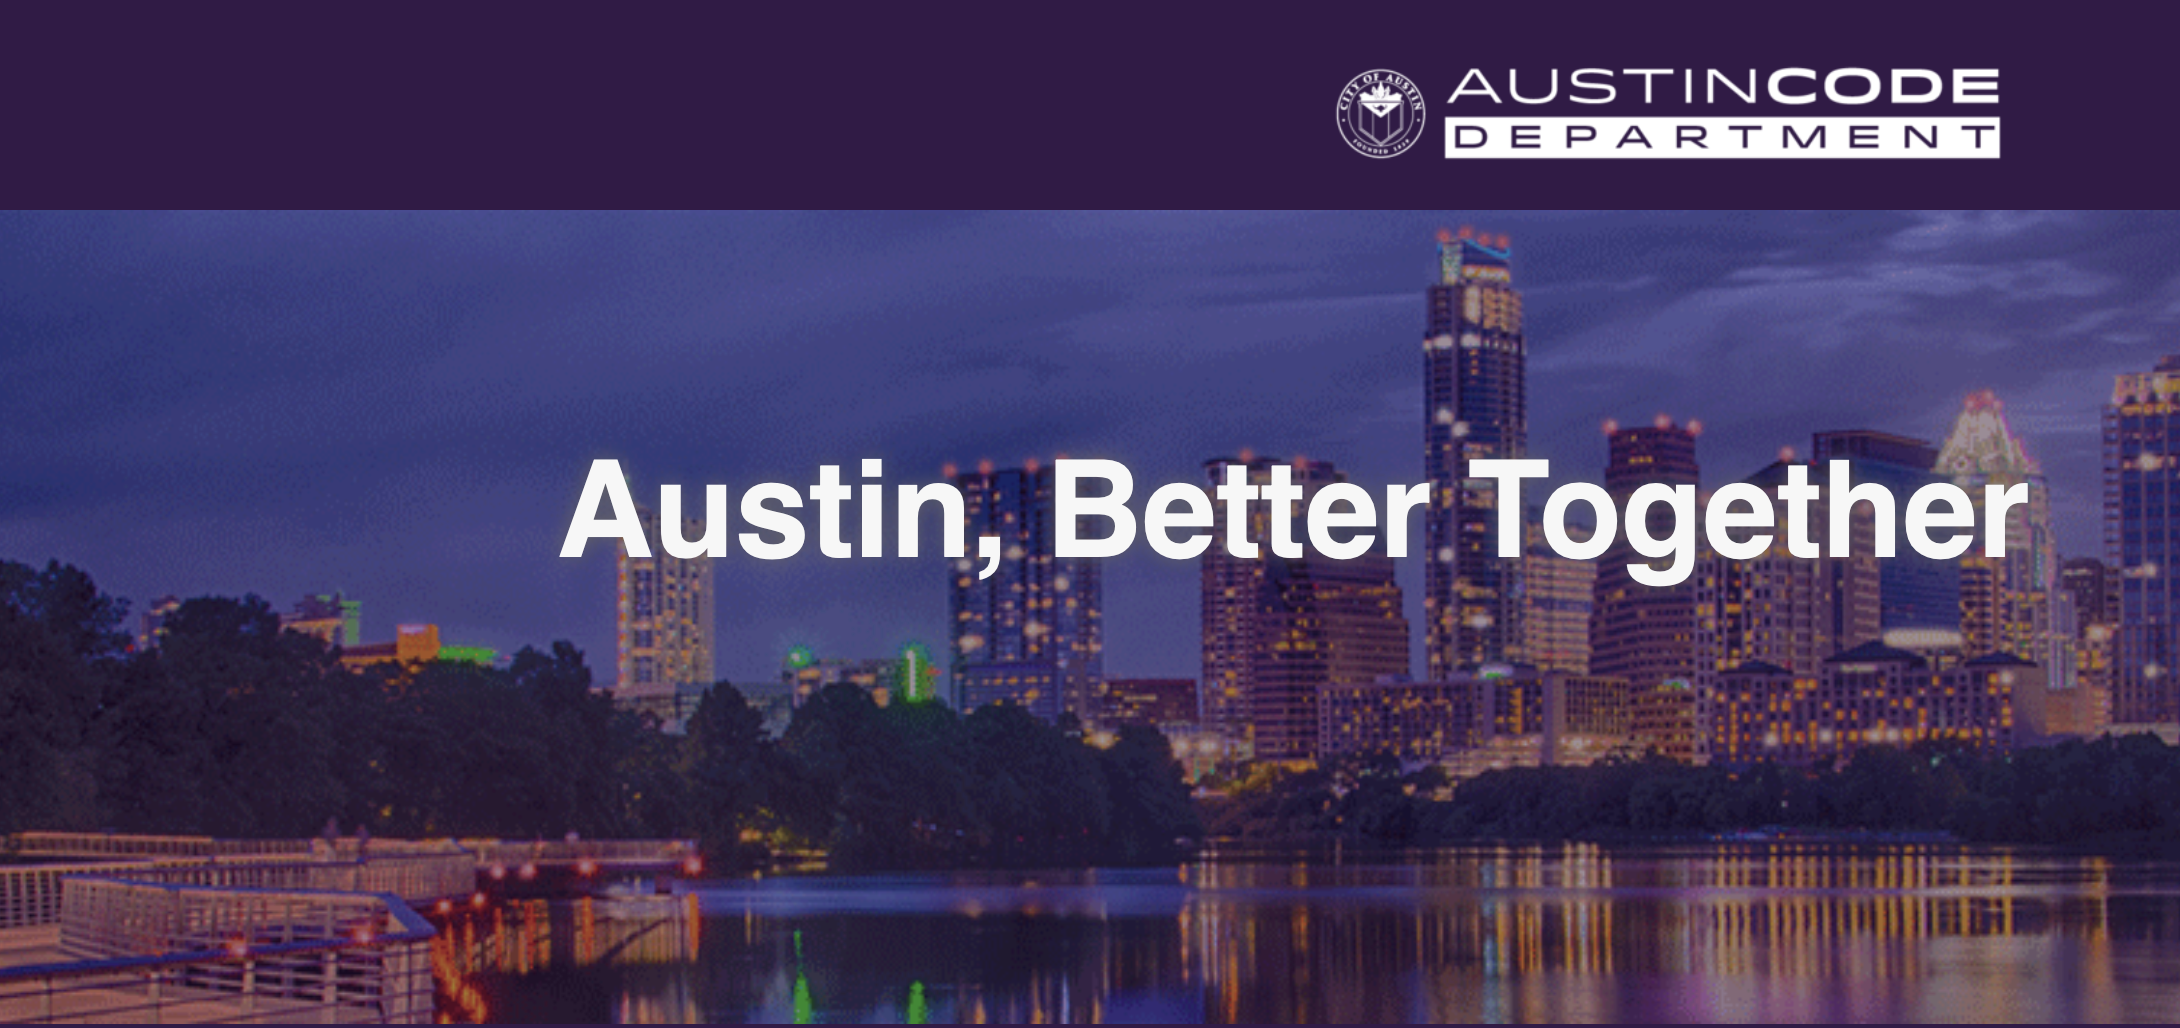 austin downtown skyline with a title saying Austin better together